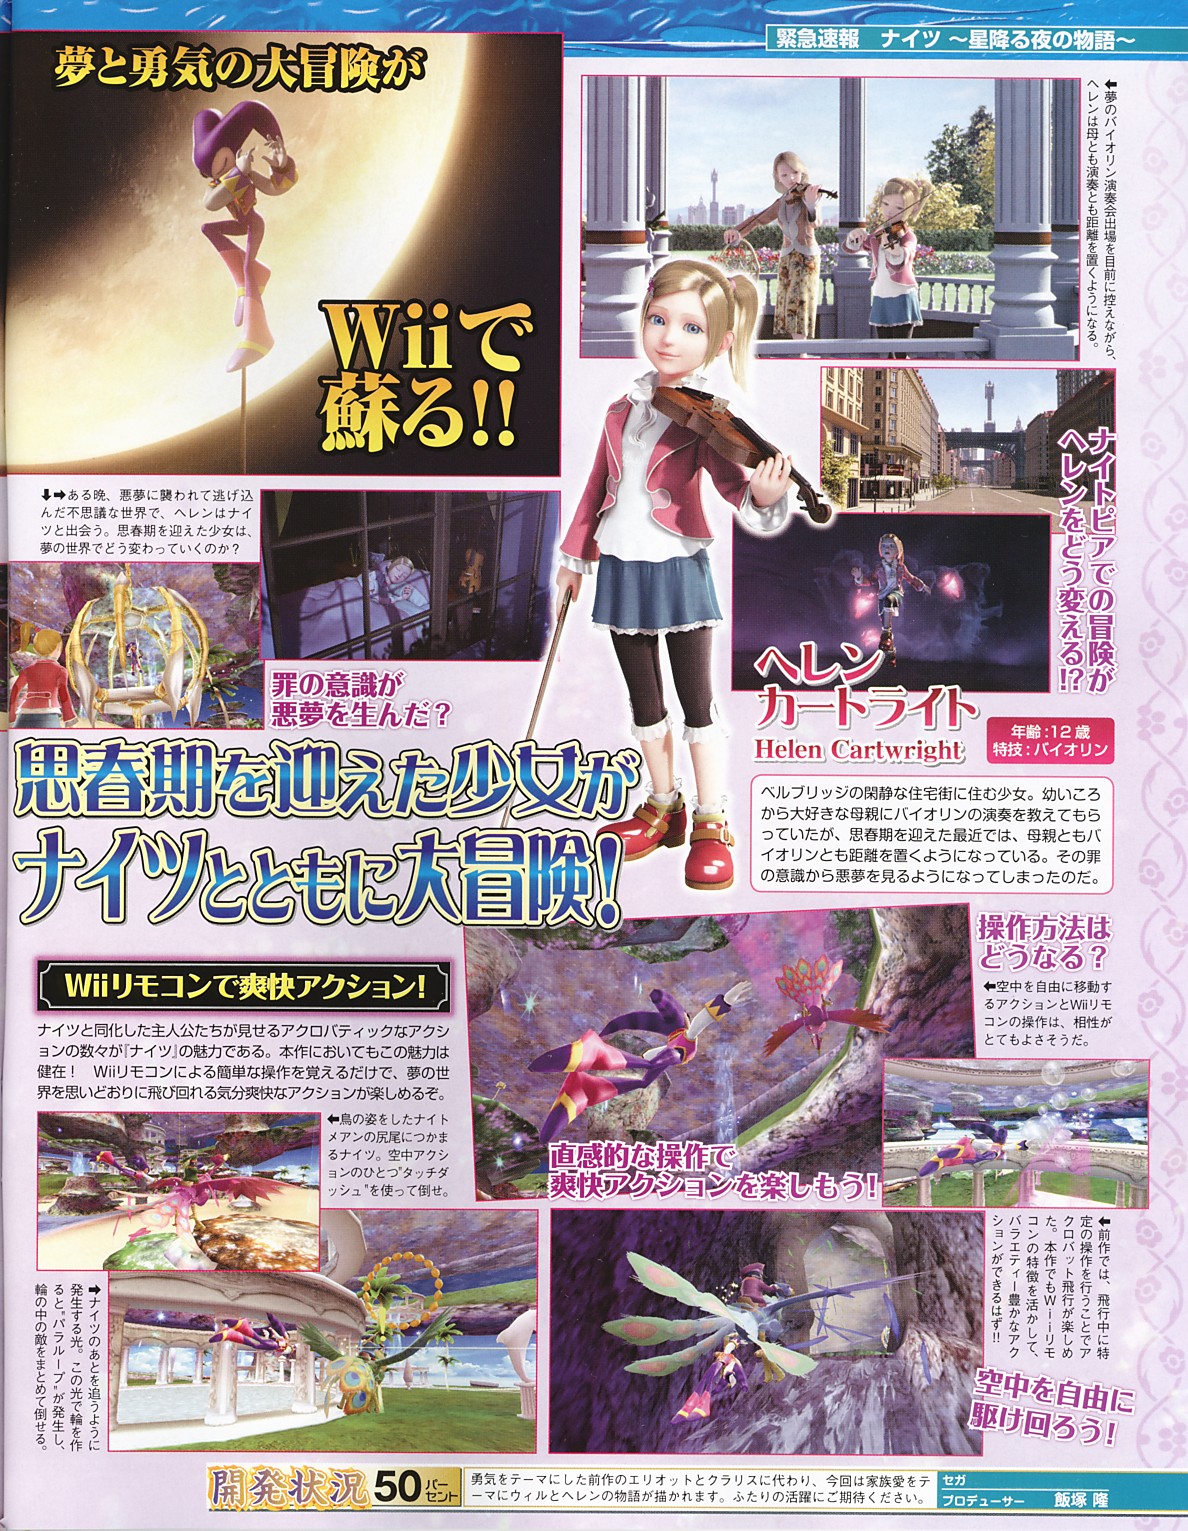 New! NiGHTS Journey of Dreams Scan